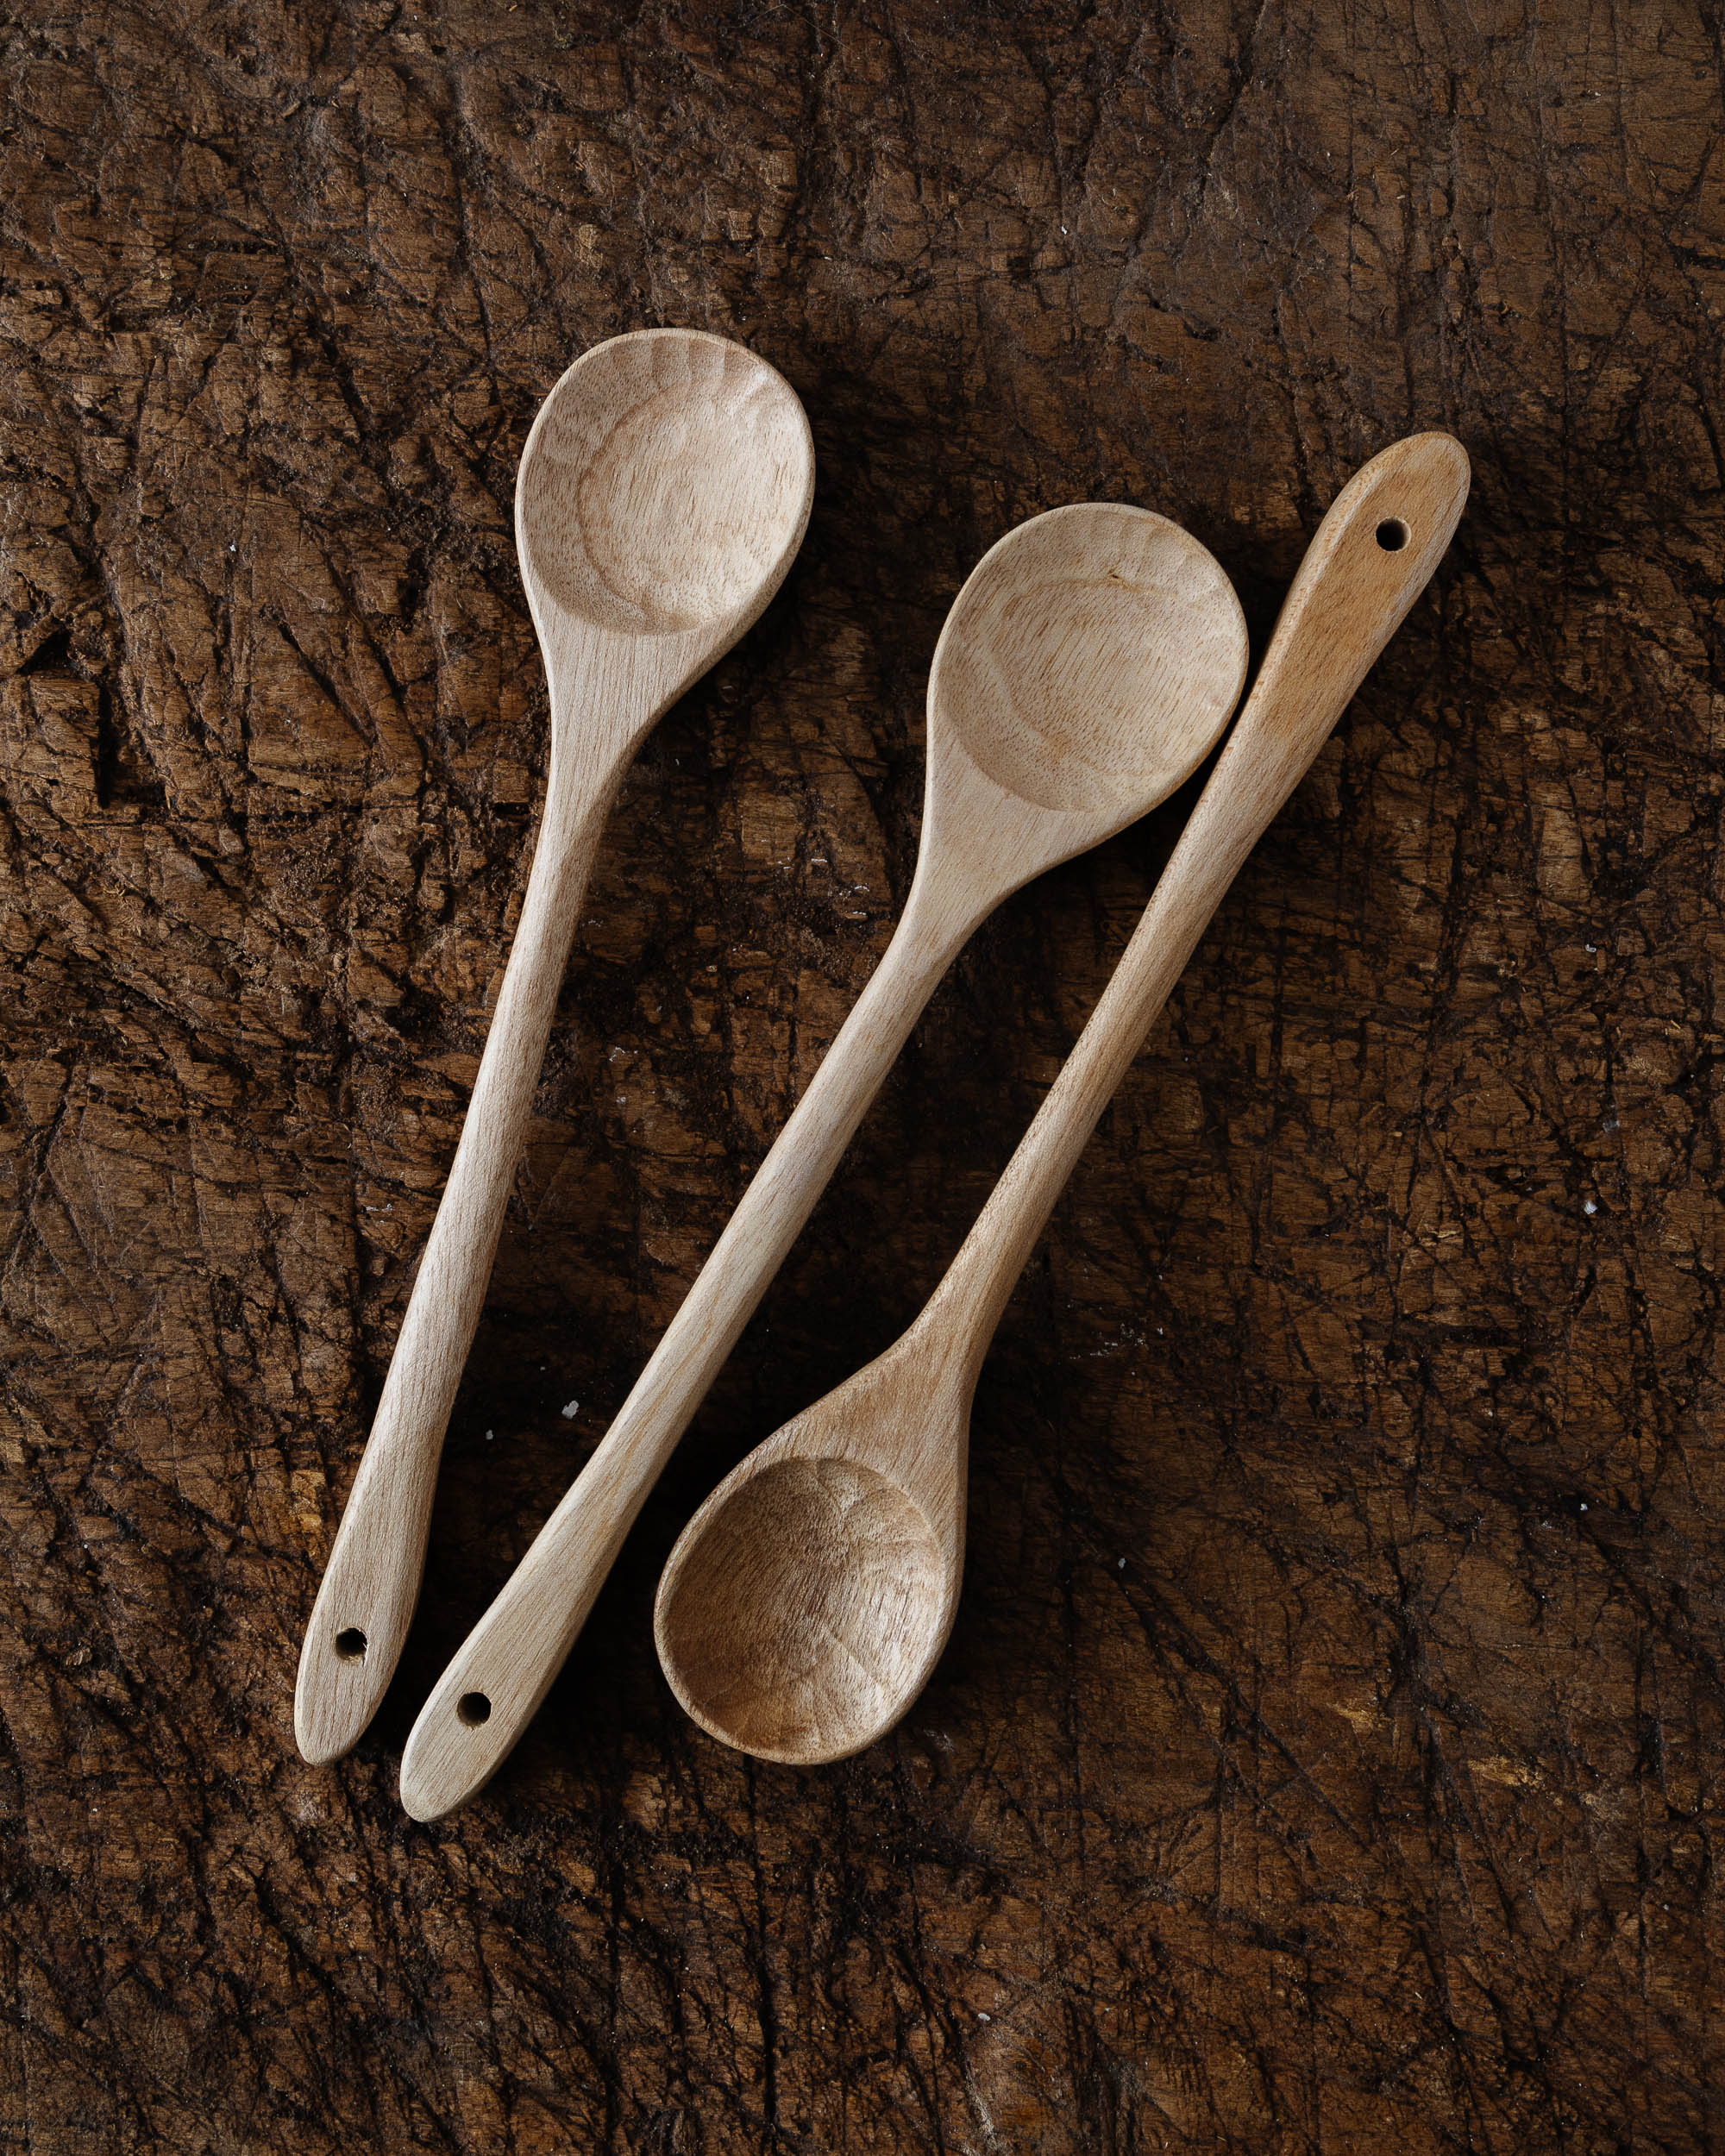 An oil finish for hand-carved wooden spoons - the Maine Coast